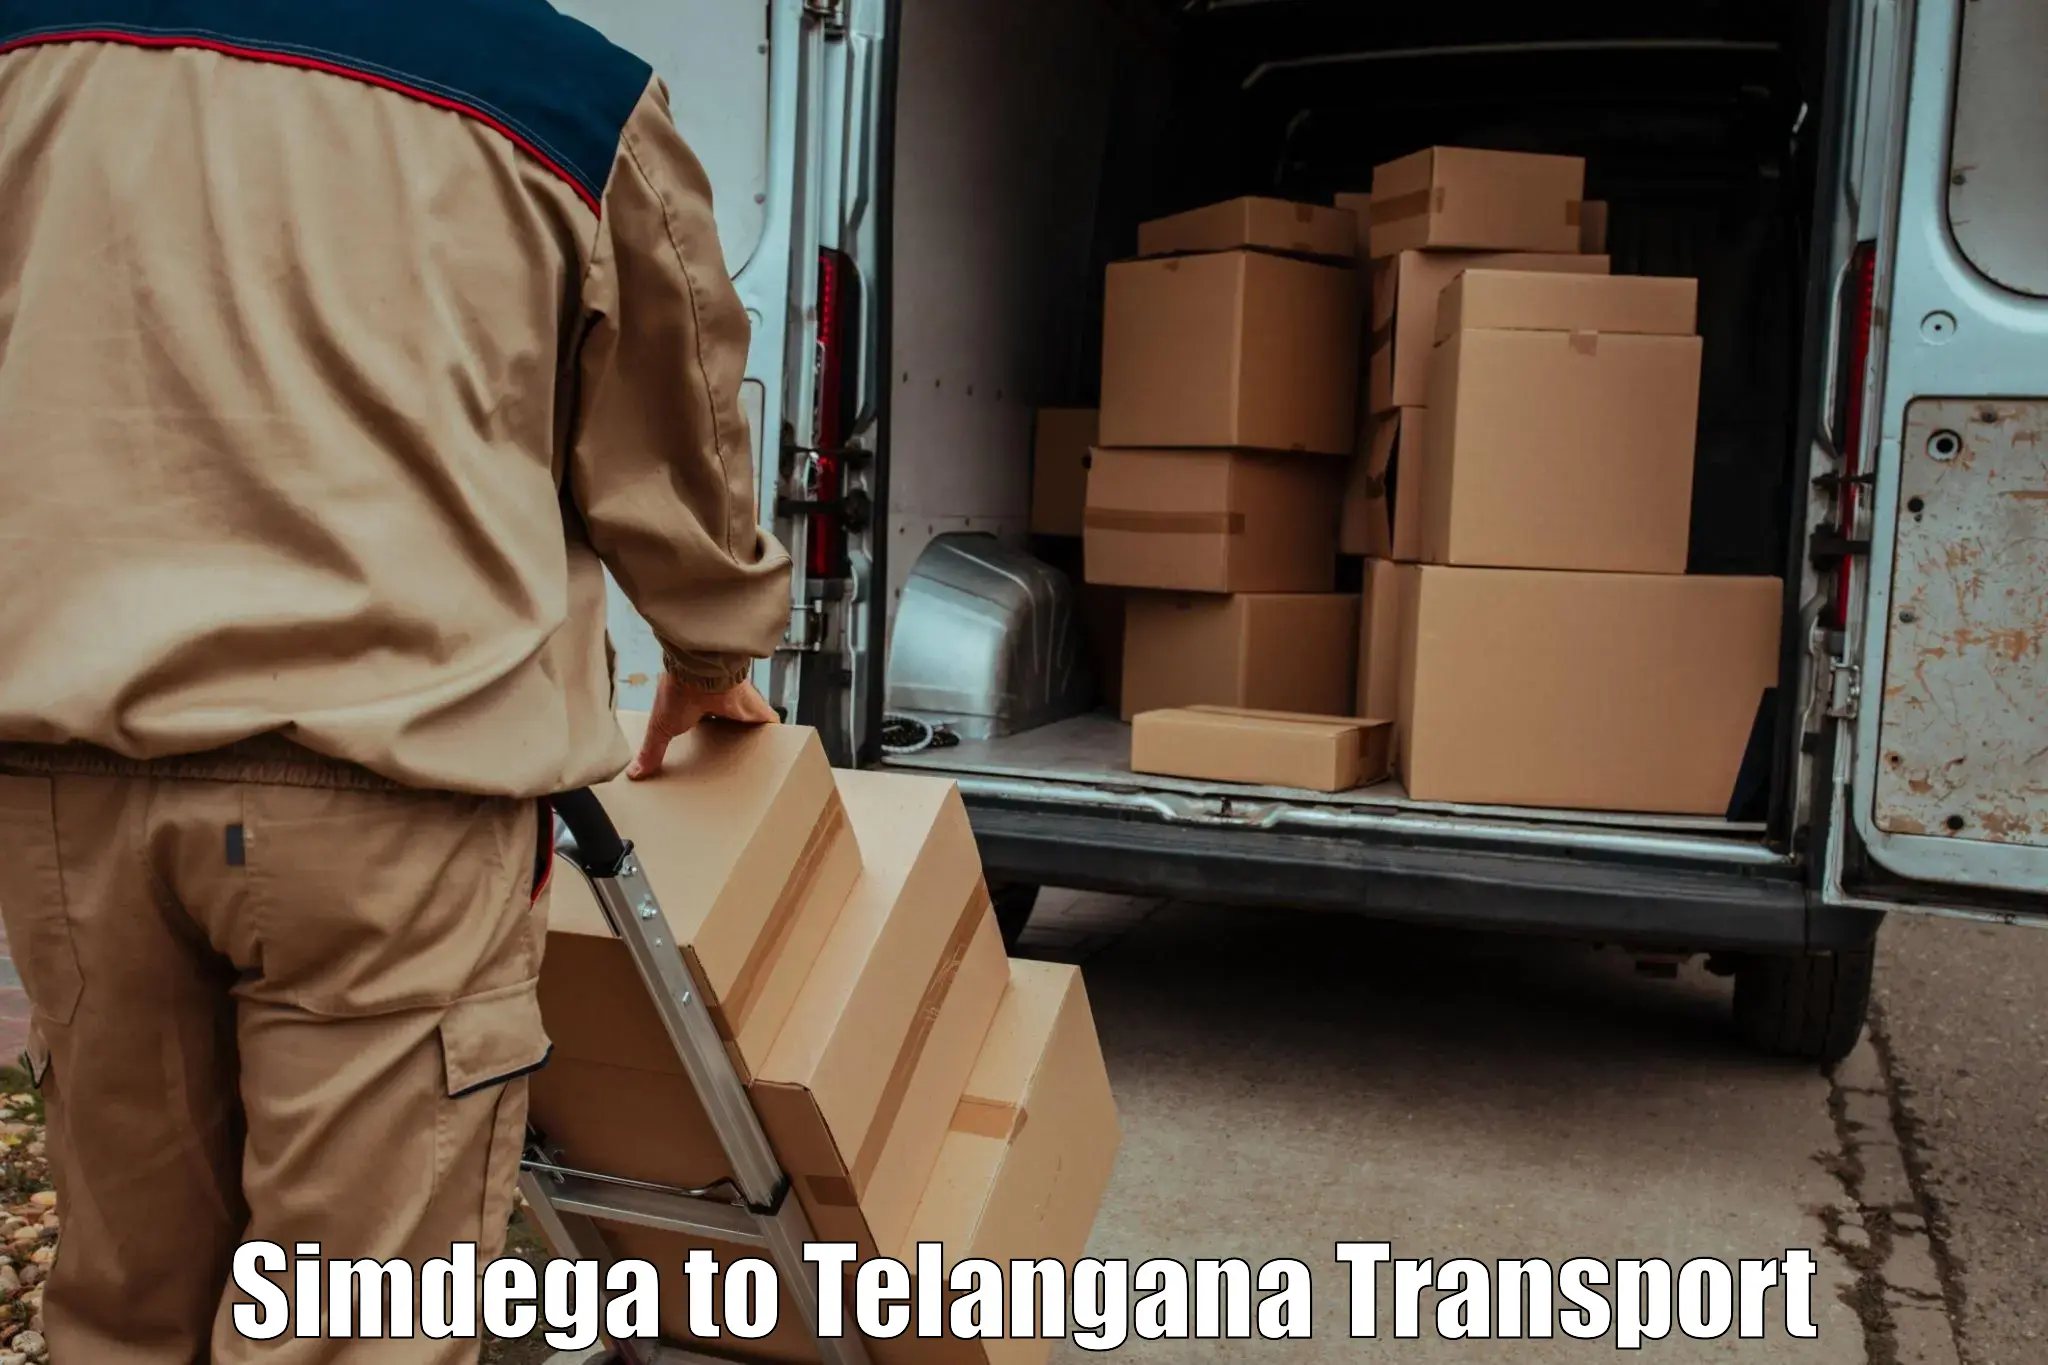 Container transport service Simdega to IIT Hyderabad